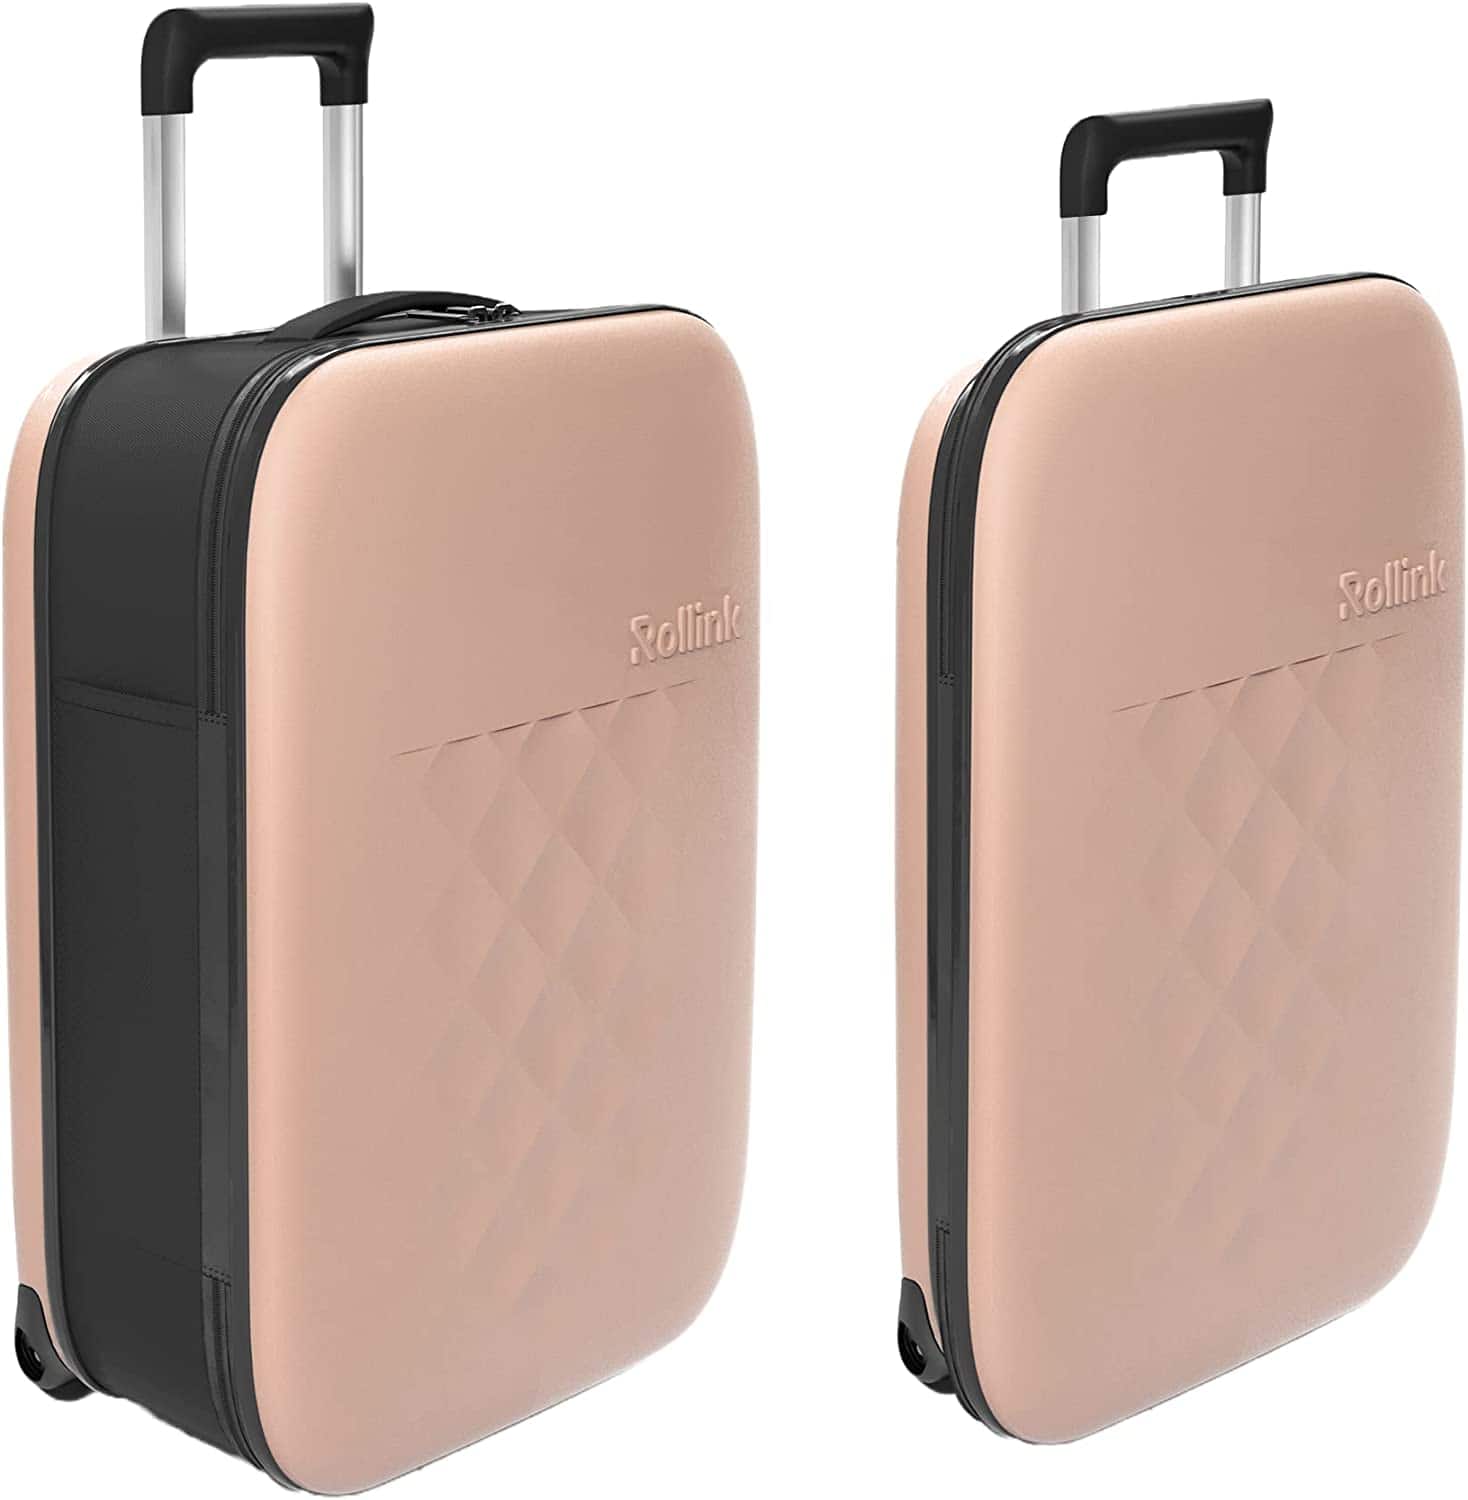 This carry on size suitcase collapses down to 2" thick. Making it easy to store when not in use.